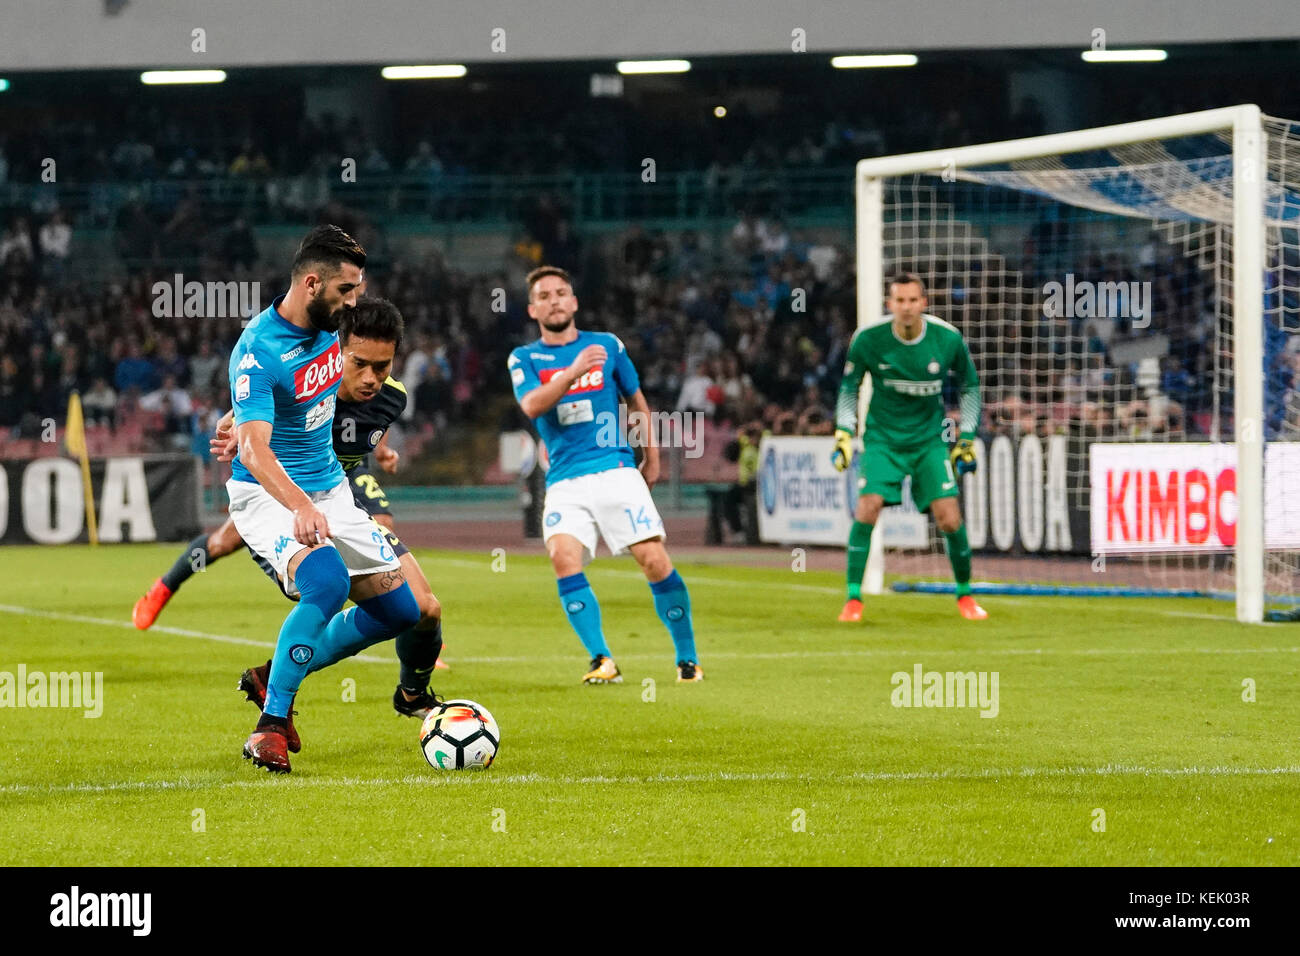 Napoli, Italy. 21st Oct, 2017. Naples - Italy 21/10/2017 ELSEID HYSAJ of S.S.C. NAPOLI and YUTO NAGATOMO of Inter fights for the ball during Serie A match between S.S.C. NAPOLI and Inter at Stadio San Paolo of Naples. Credit: Emanuele Sessa/Pacific Press/Alamy Live News Stock Photo